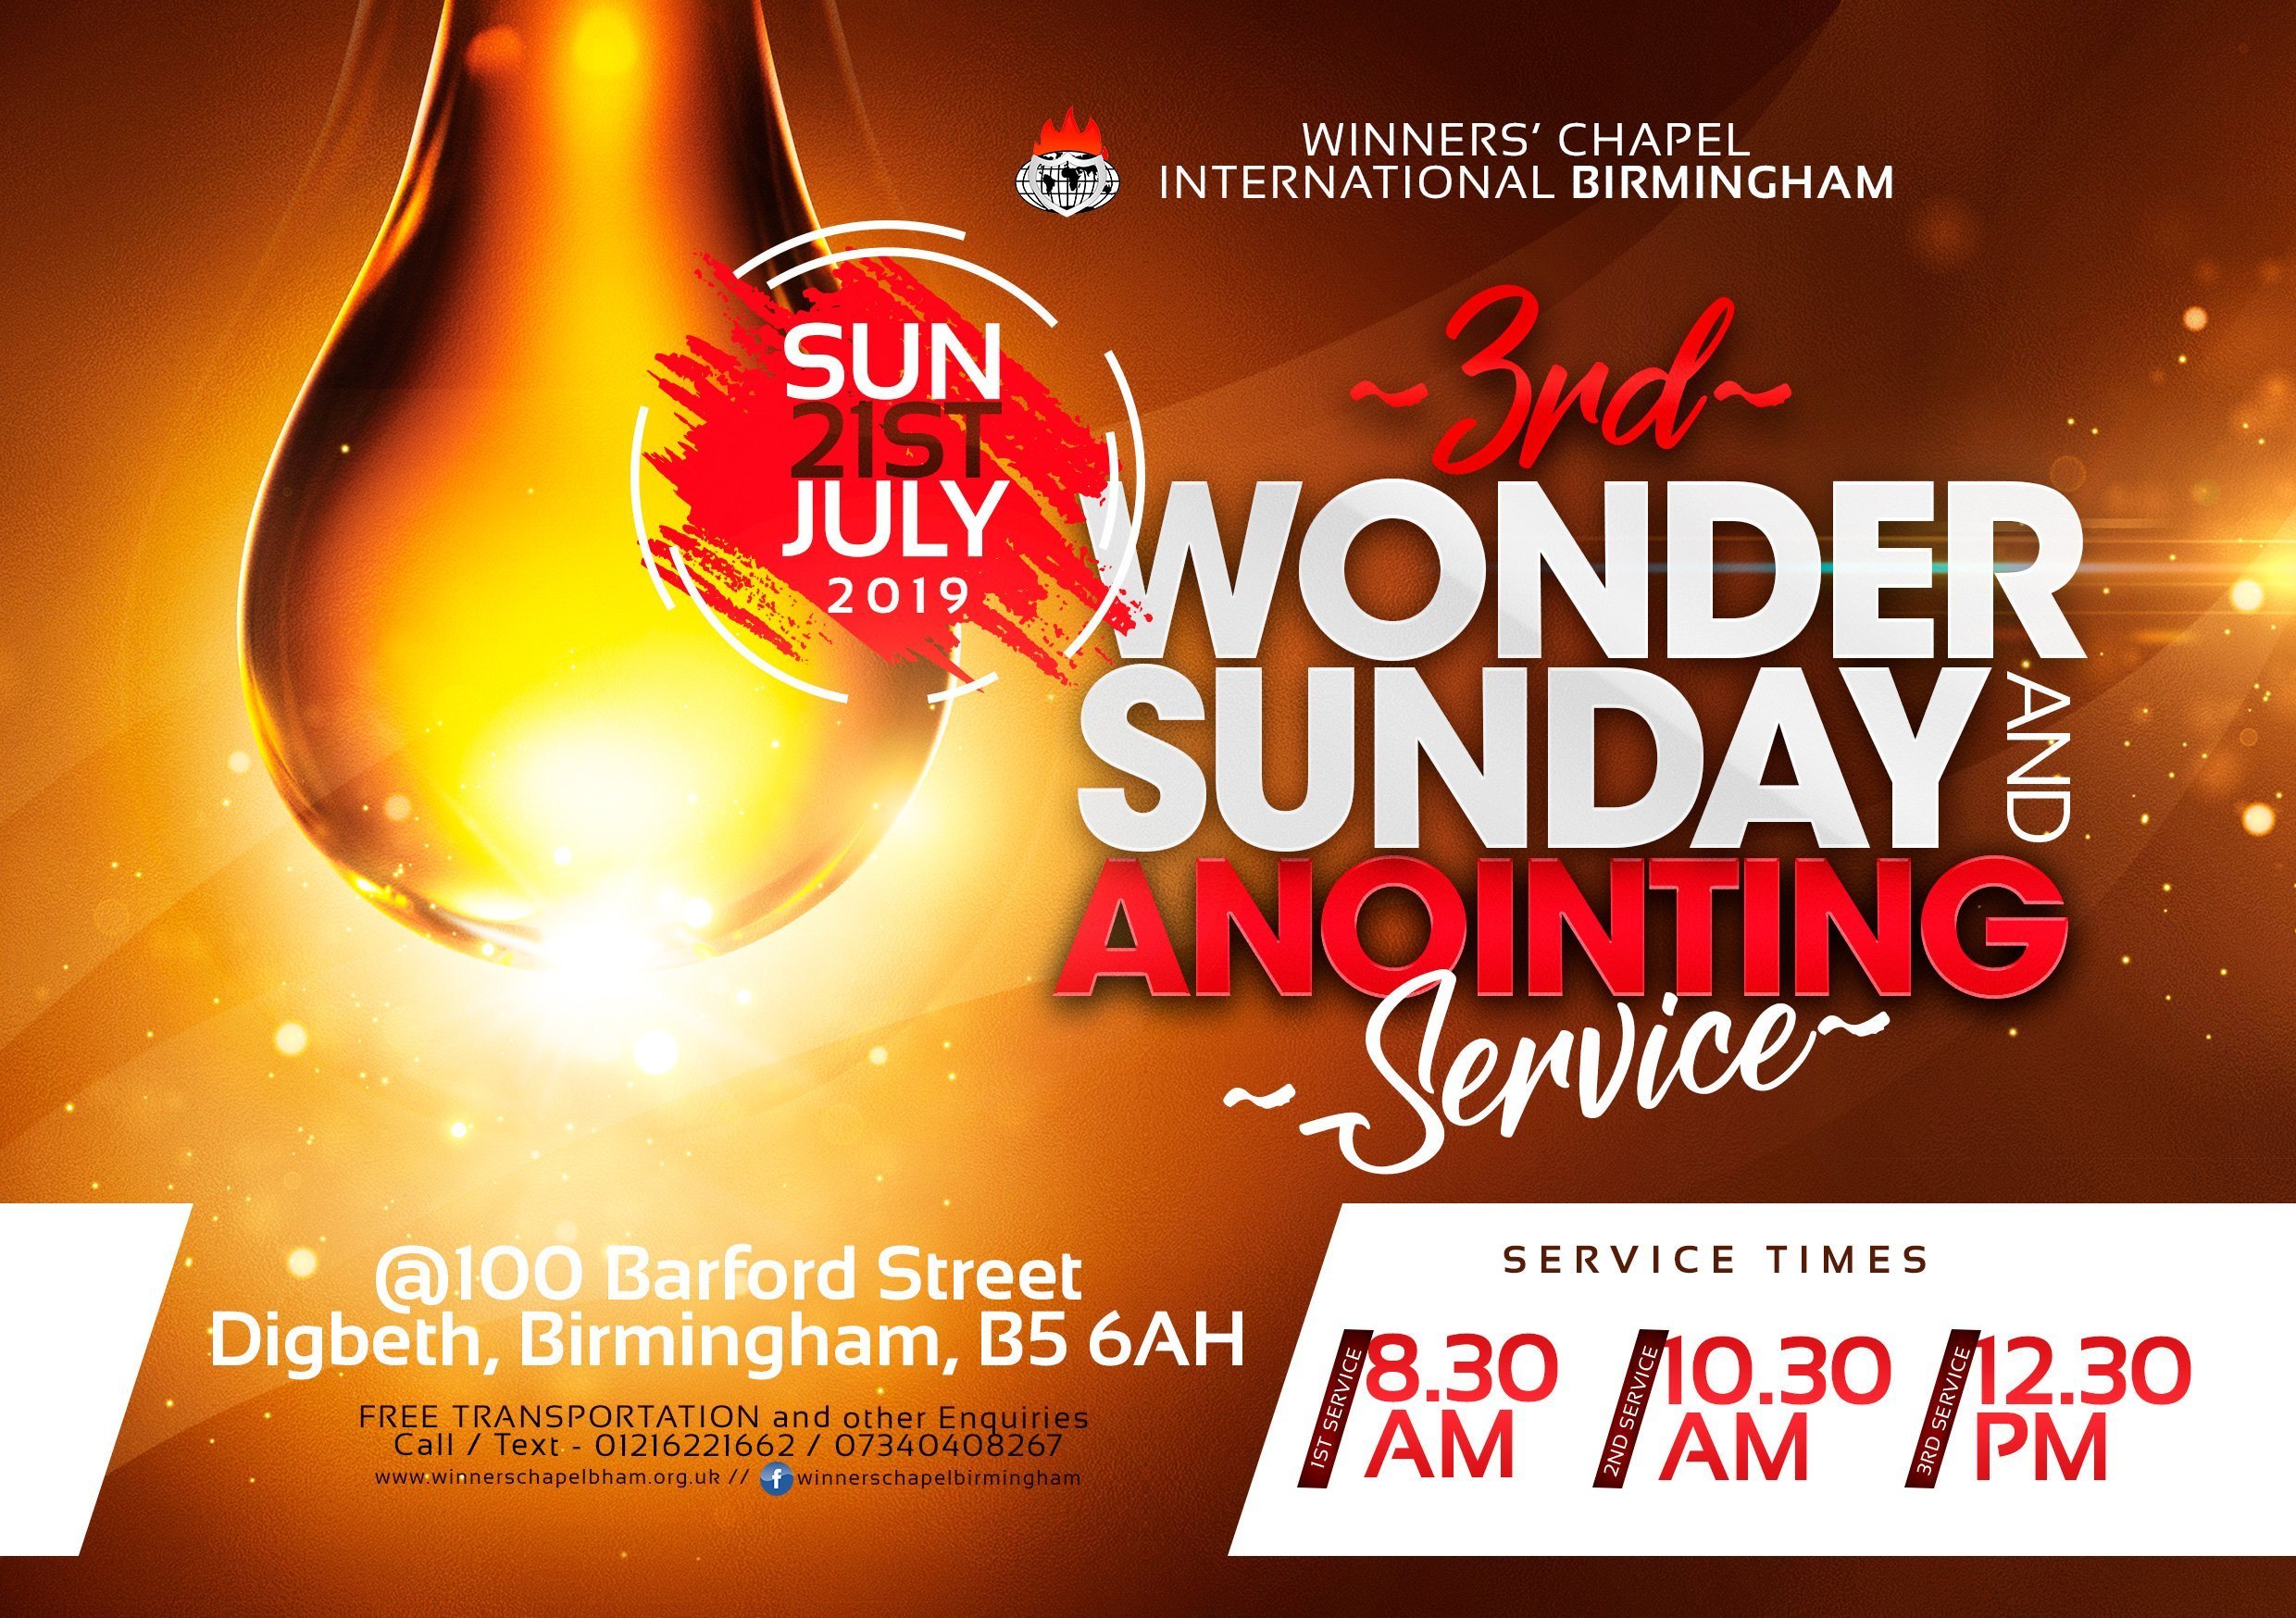 SERVICE ANNOUNCEMENTS FOR SUNDAY, JULY 14TH 2019